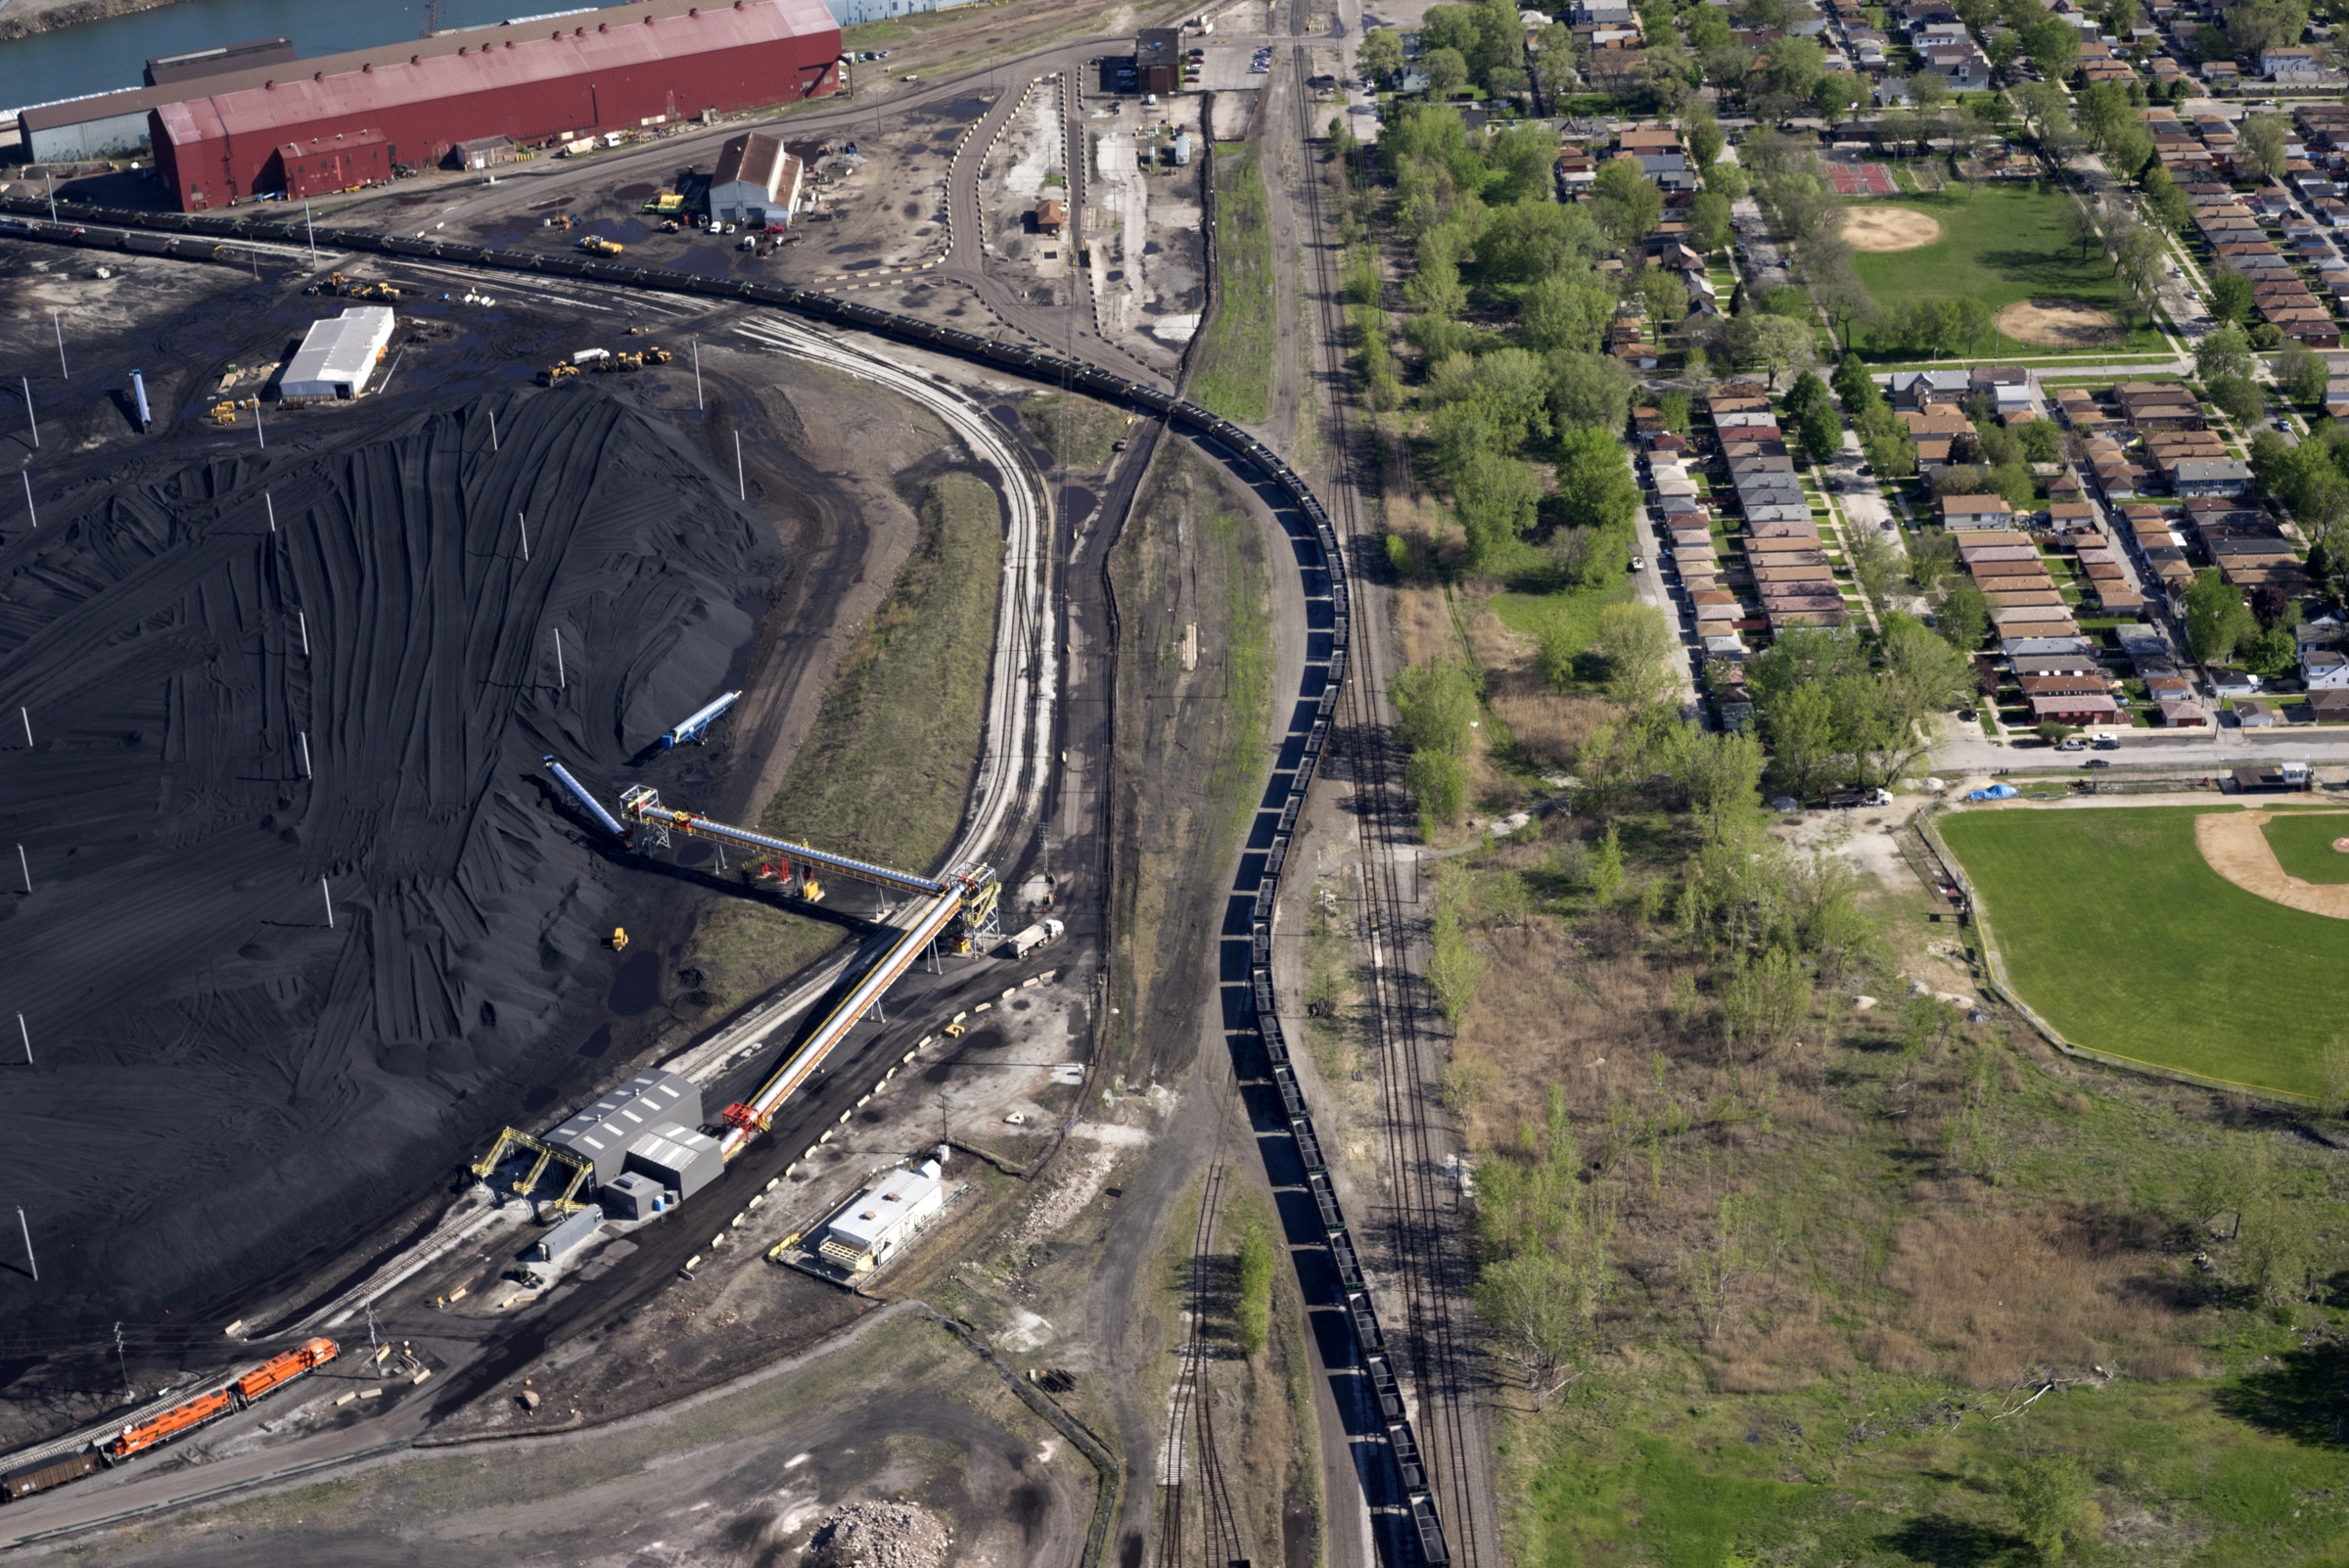 Petcoke filled train snaking through the neighborhood, Southeast Side, Chicago, IL 2015. Terry Evans